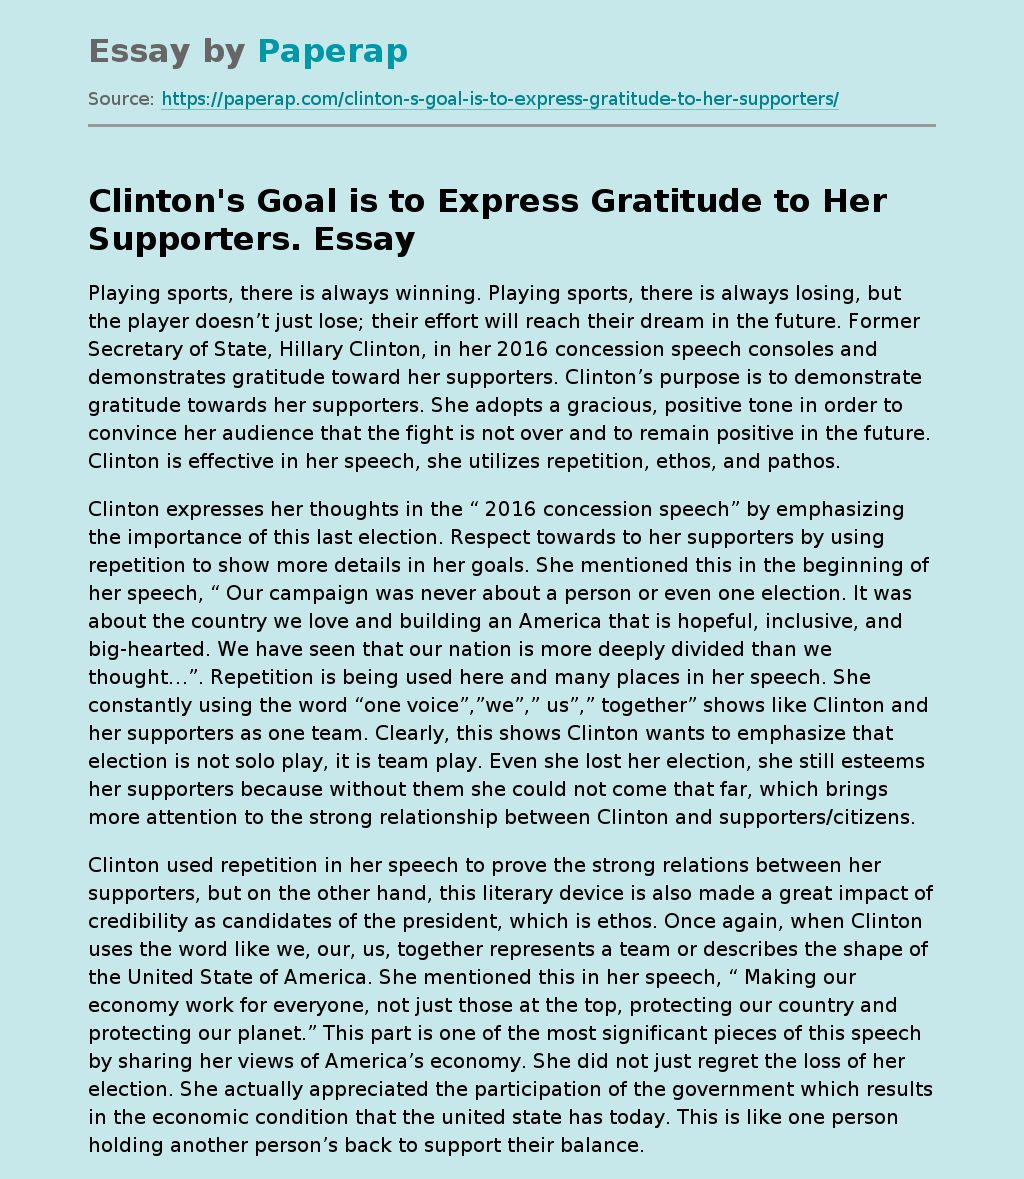 Clinton's Goal is to Express Gratitude to Her Supporters.